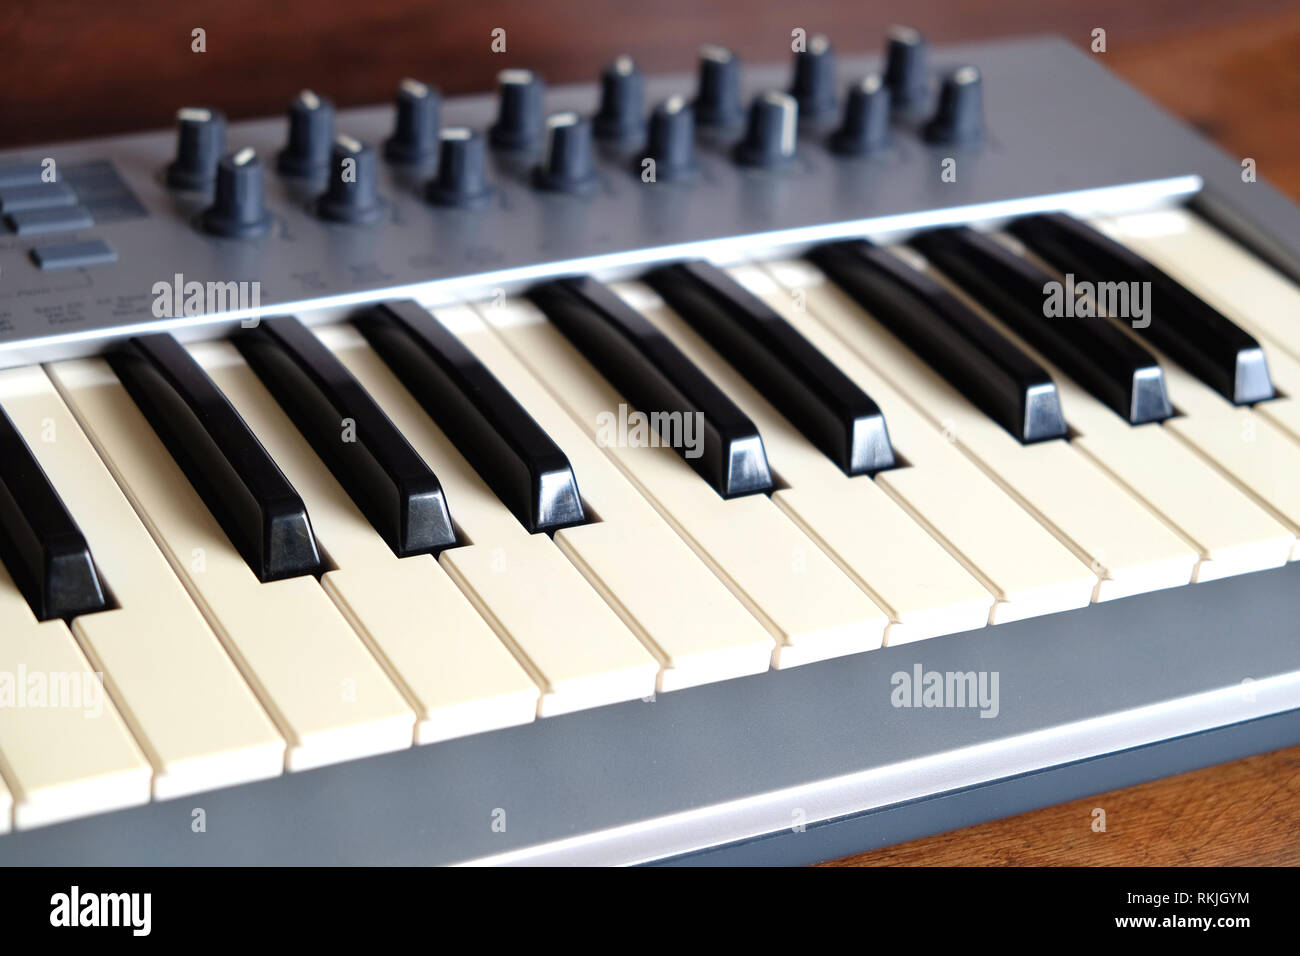 Electronic synthesizer keyboard with many control knobs in silver plastic body on wooden background side view closeup Stock Photo